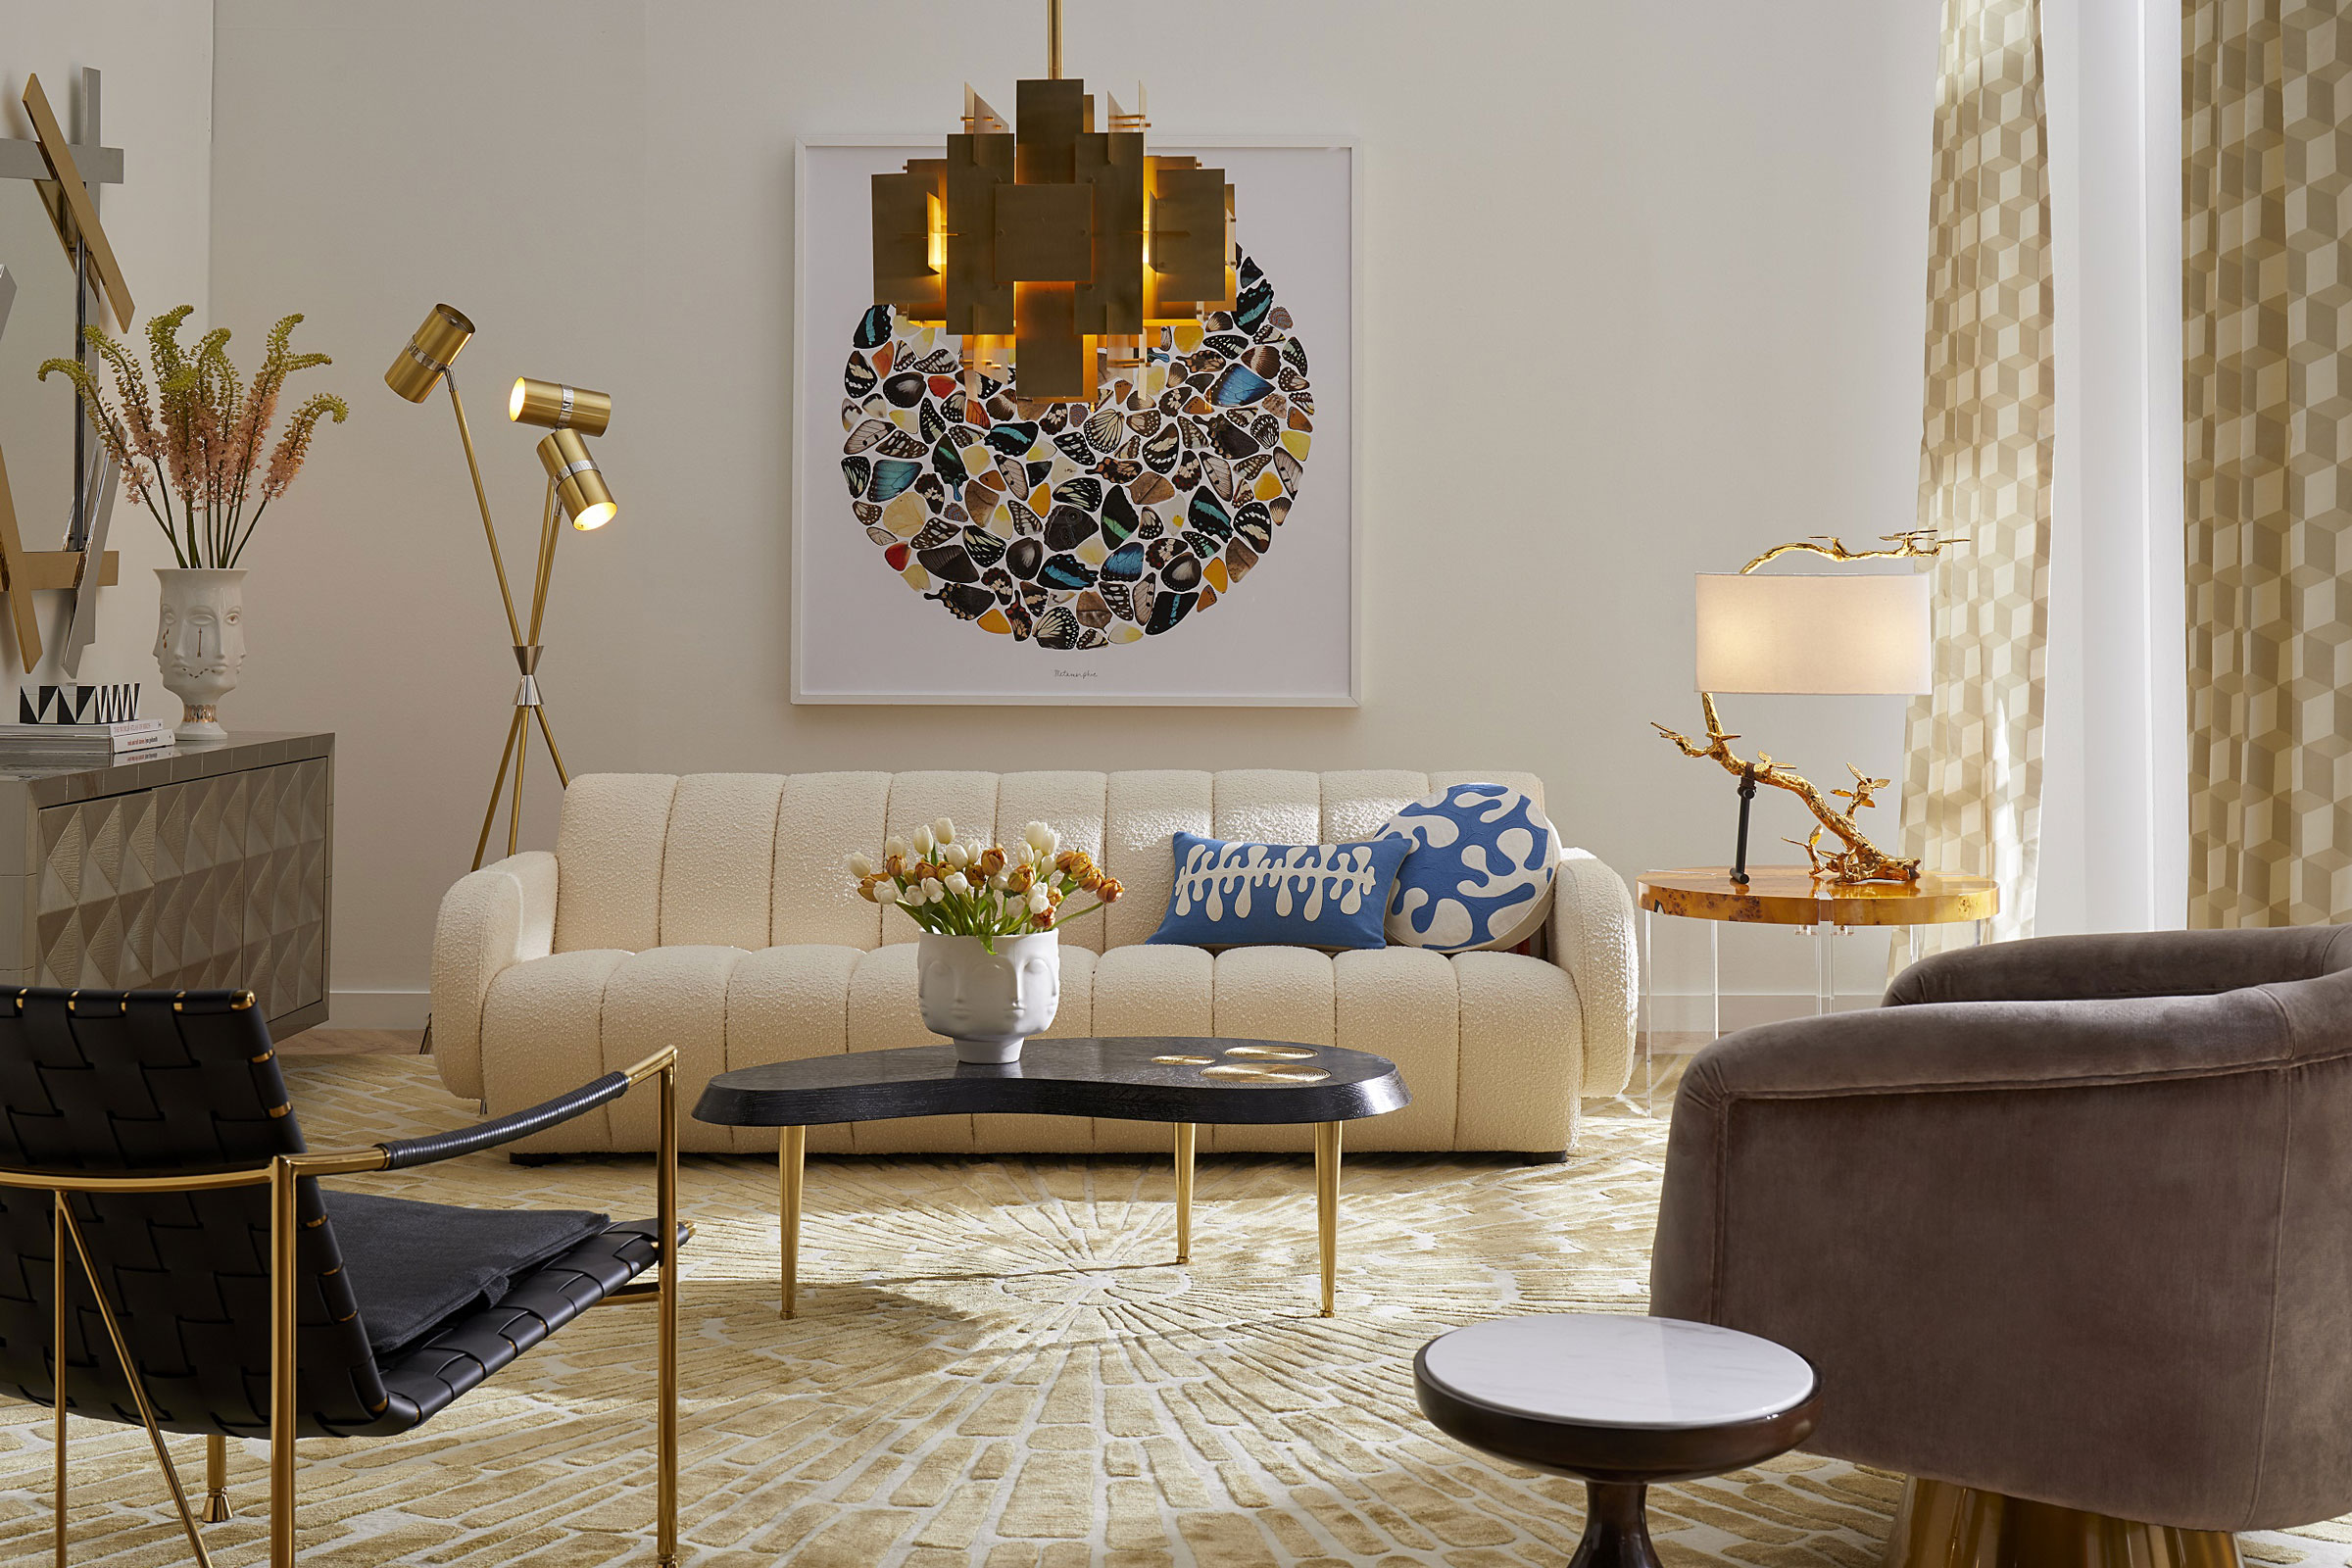 How to plan living room lighting: that fulfills need